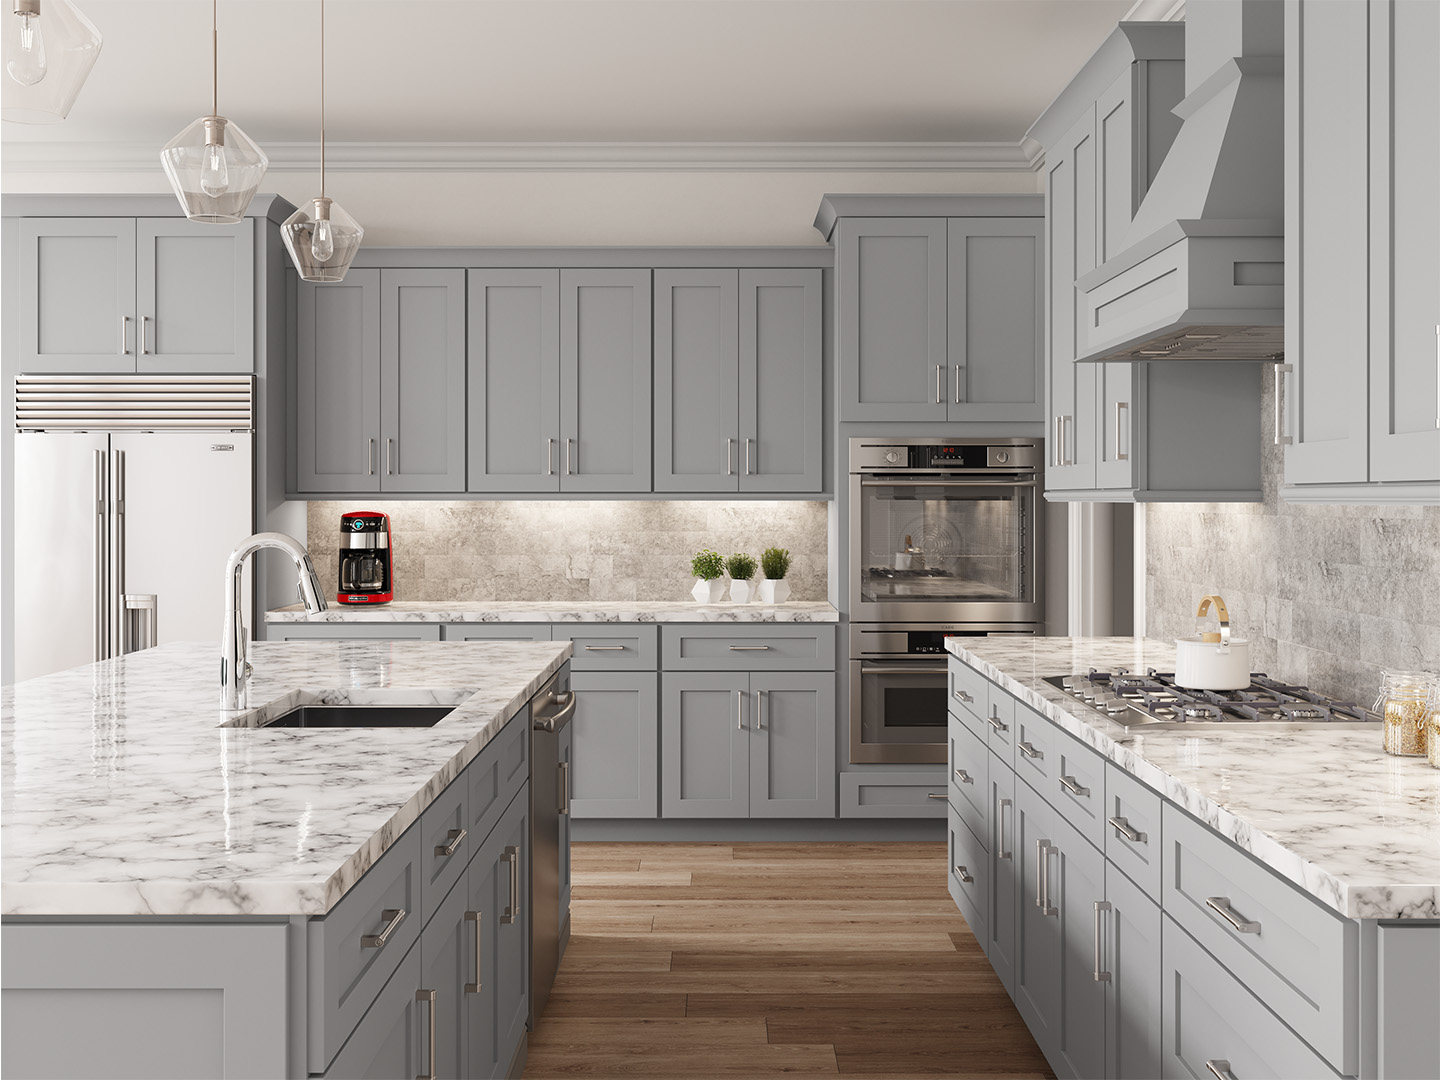 Light grey kitchen cabinets on clean looking kitchen design with white granite countertop